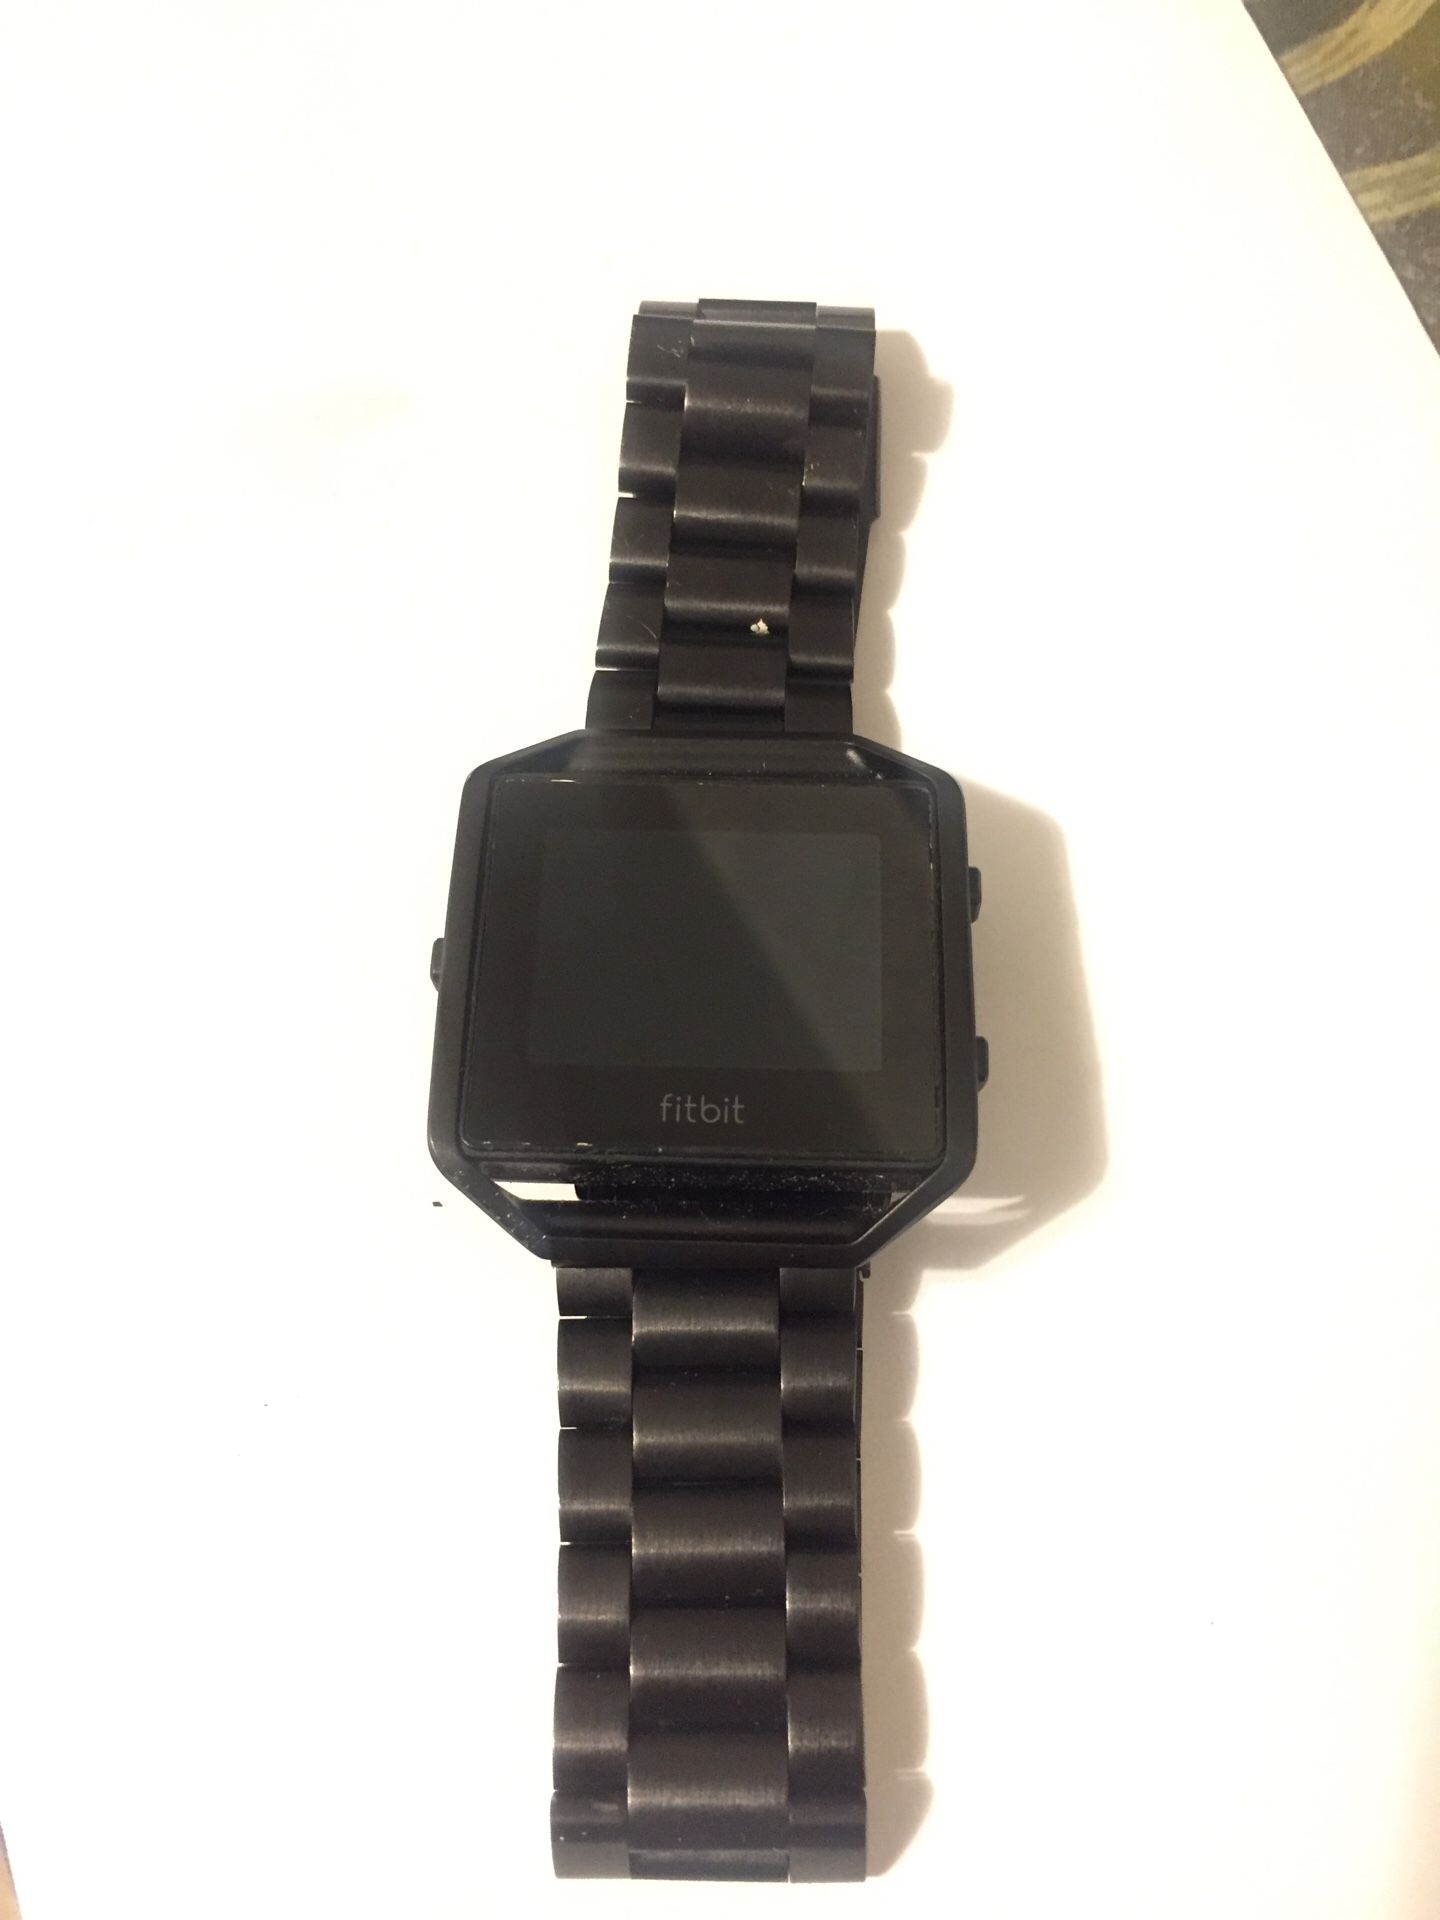 Fitbit Blaze| Charger included